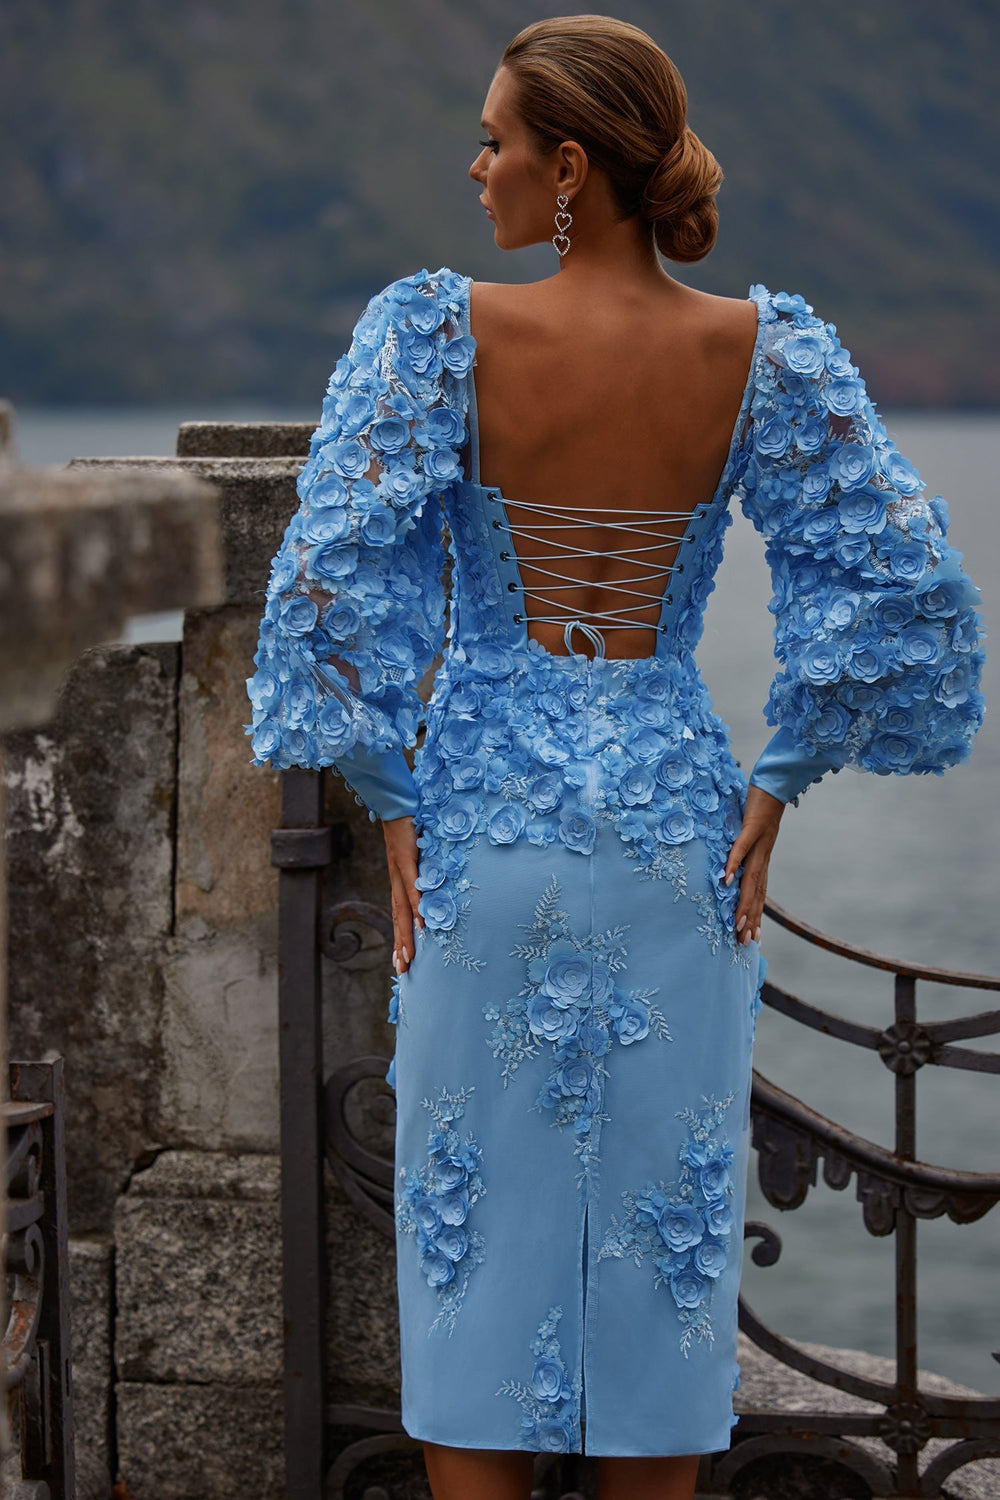 Ginvra Blue Floral Dress with Lace-Up Back